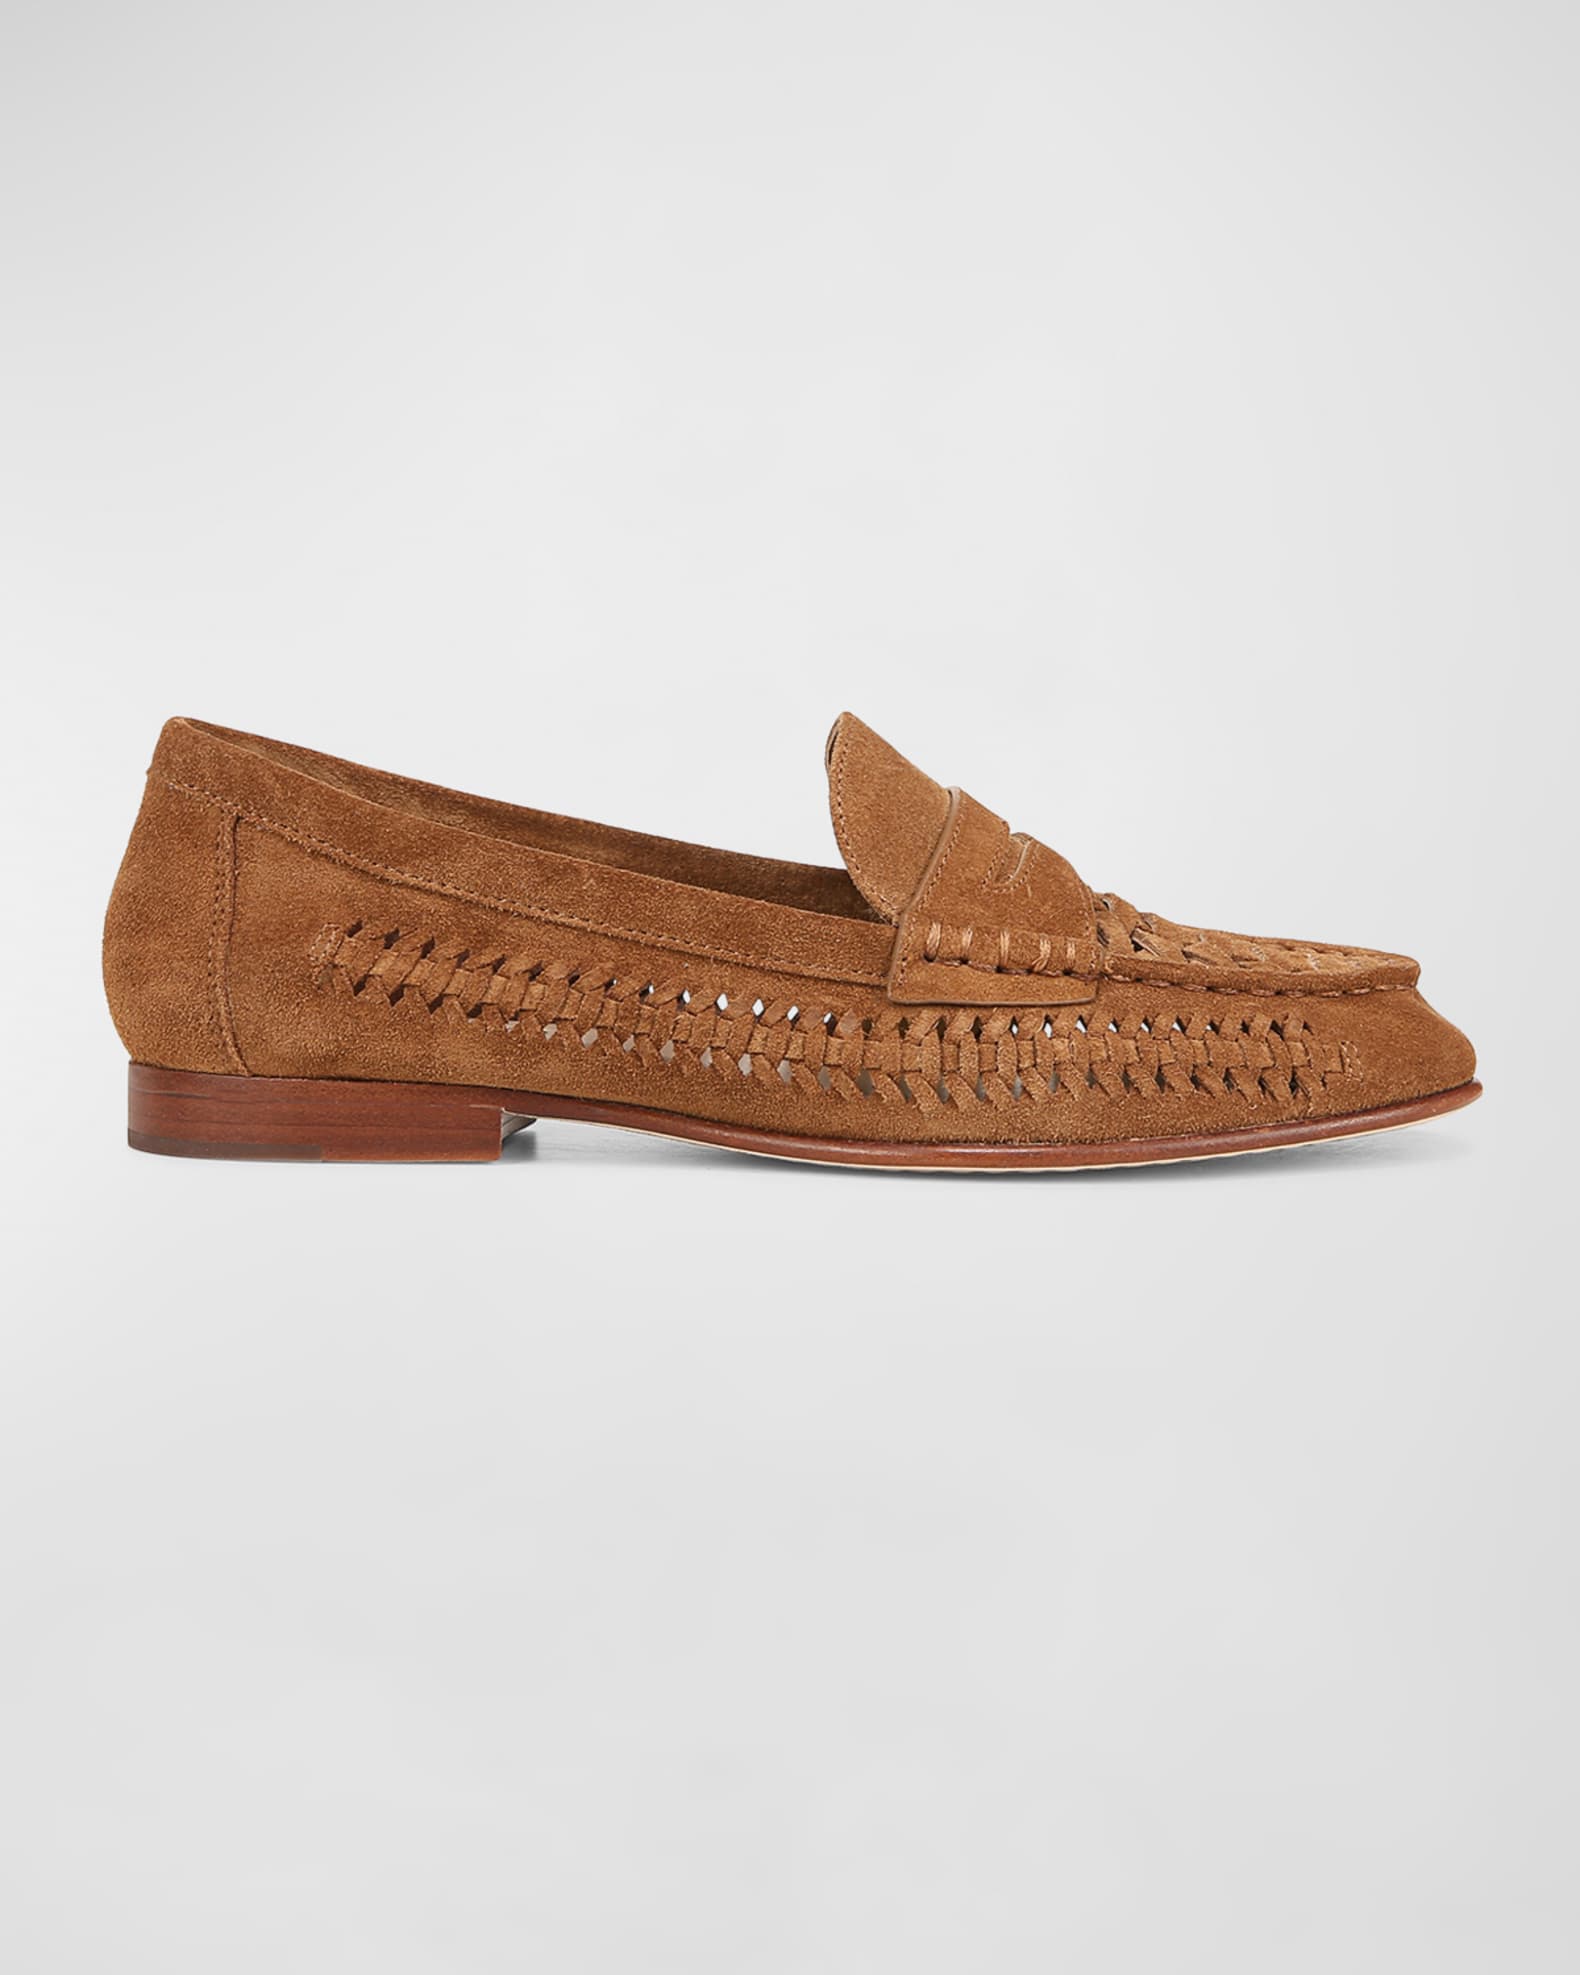 Raffia-trimmed leather loafers